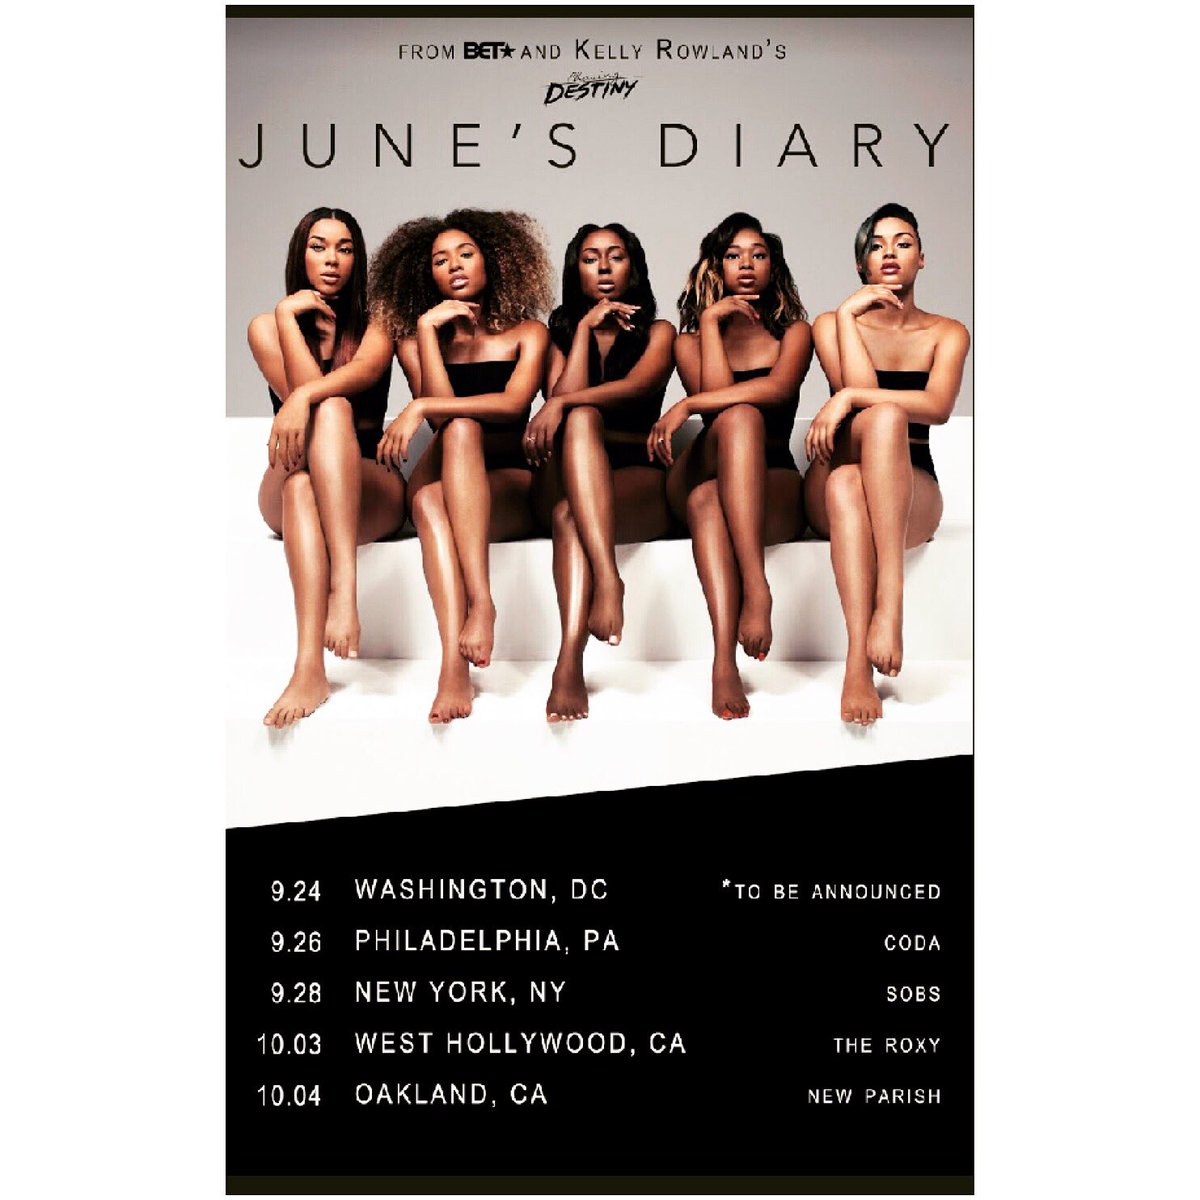 RT @junesdiary: Coming to a city near you!!!! ????  We're going on tour & we want you to be there!!!! #junesdiary #ItsOnlyTheBeginning https:/…